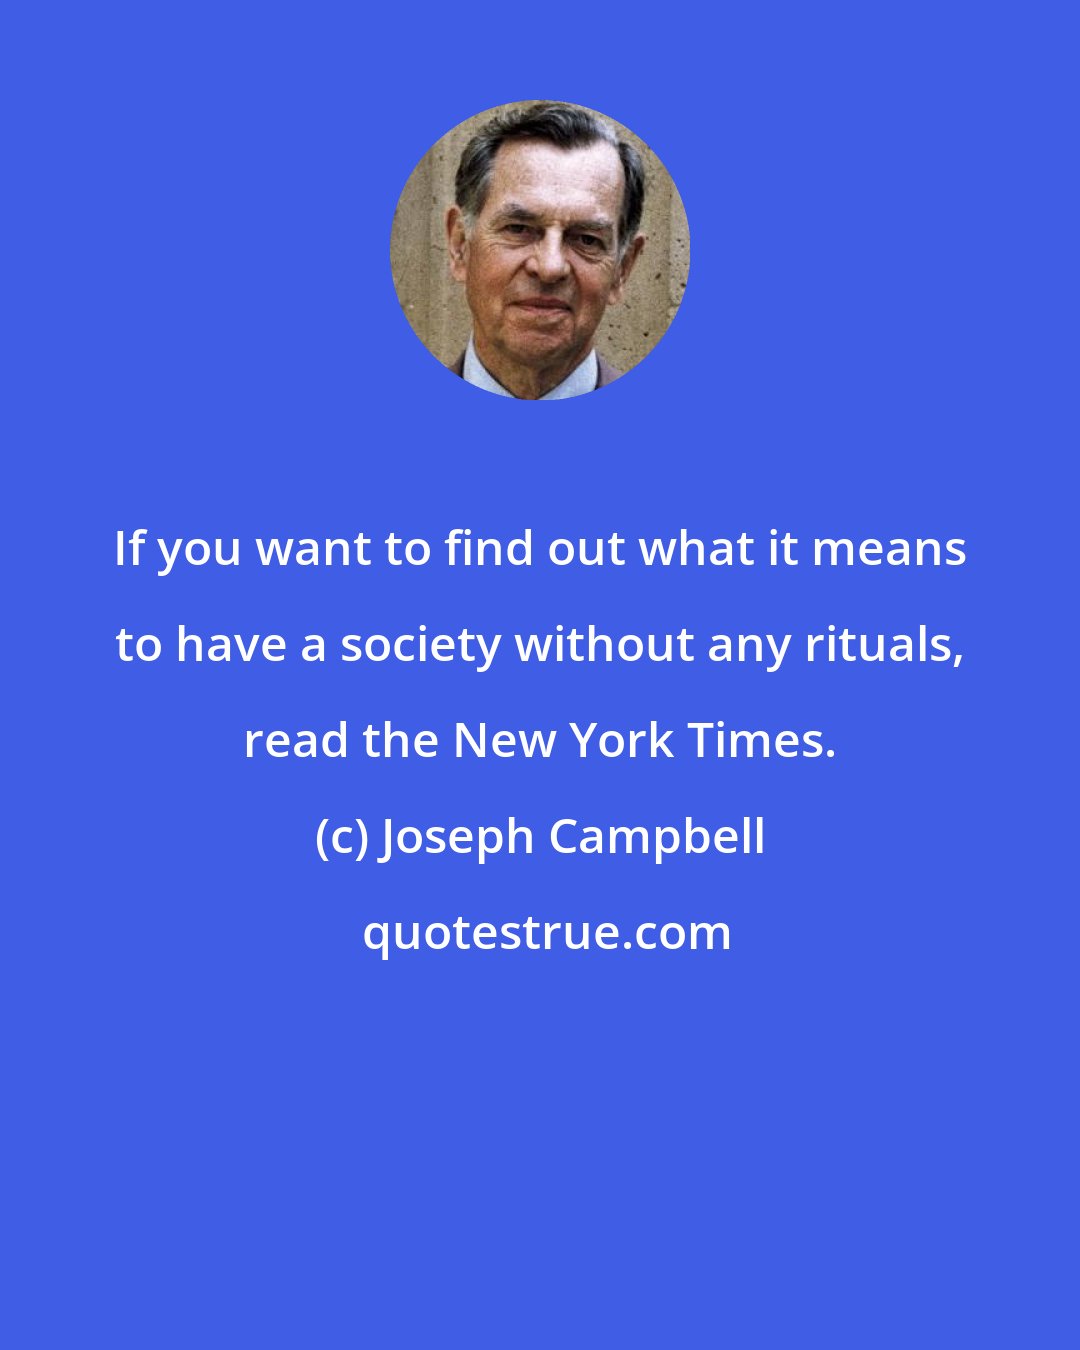 Joseph Campbell: If you want to find out what it means to have a society without any rituals, read the New York Times.